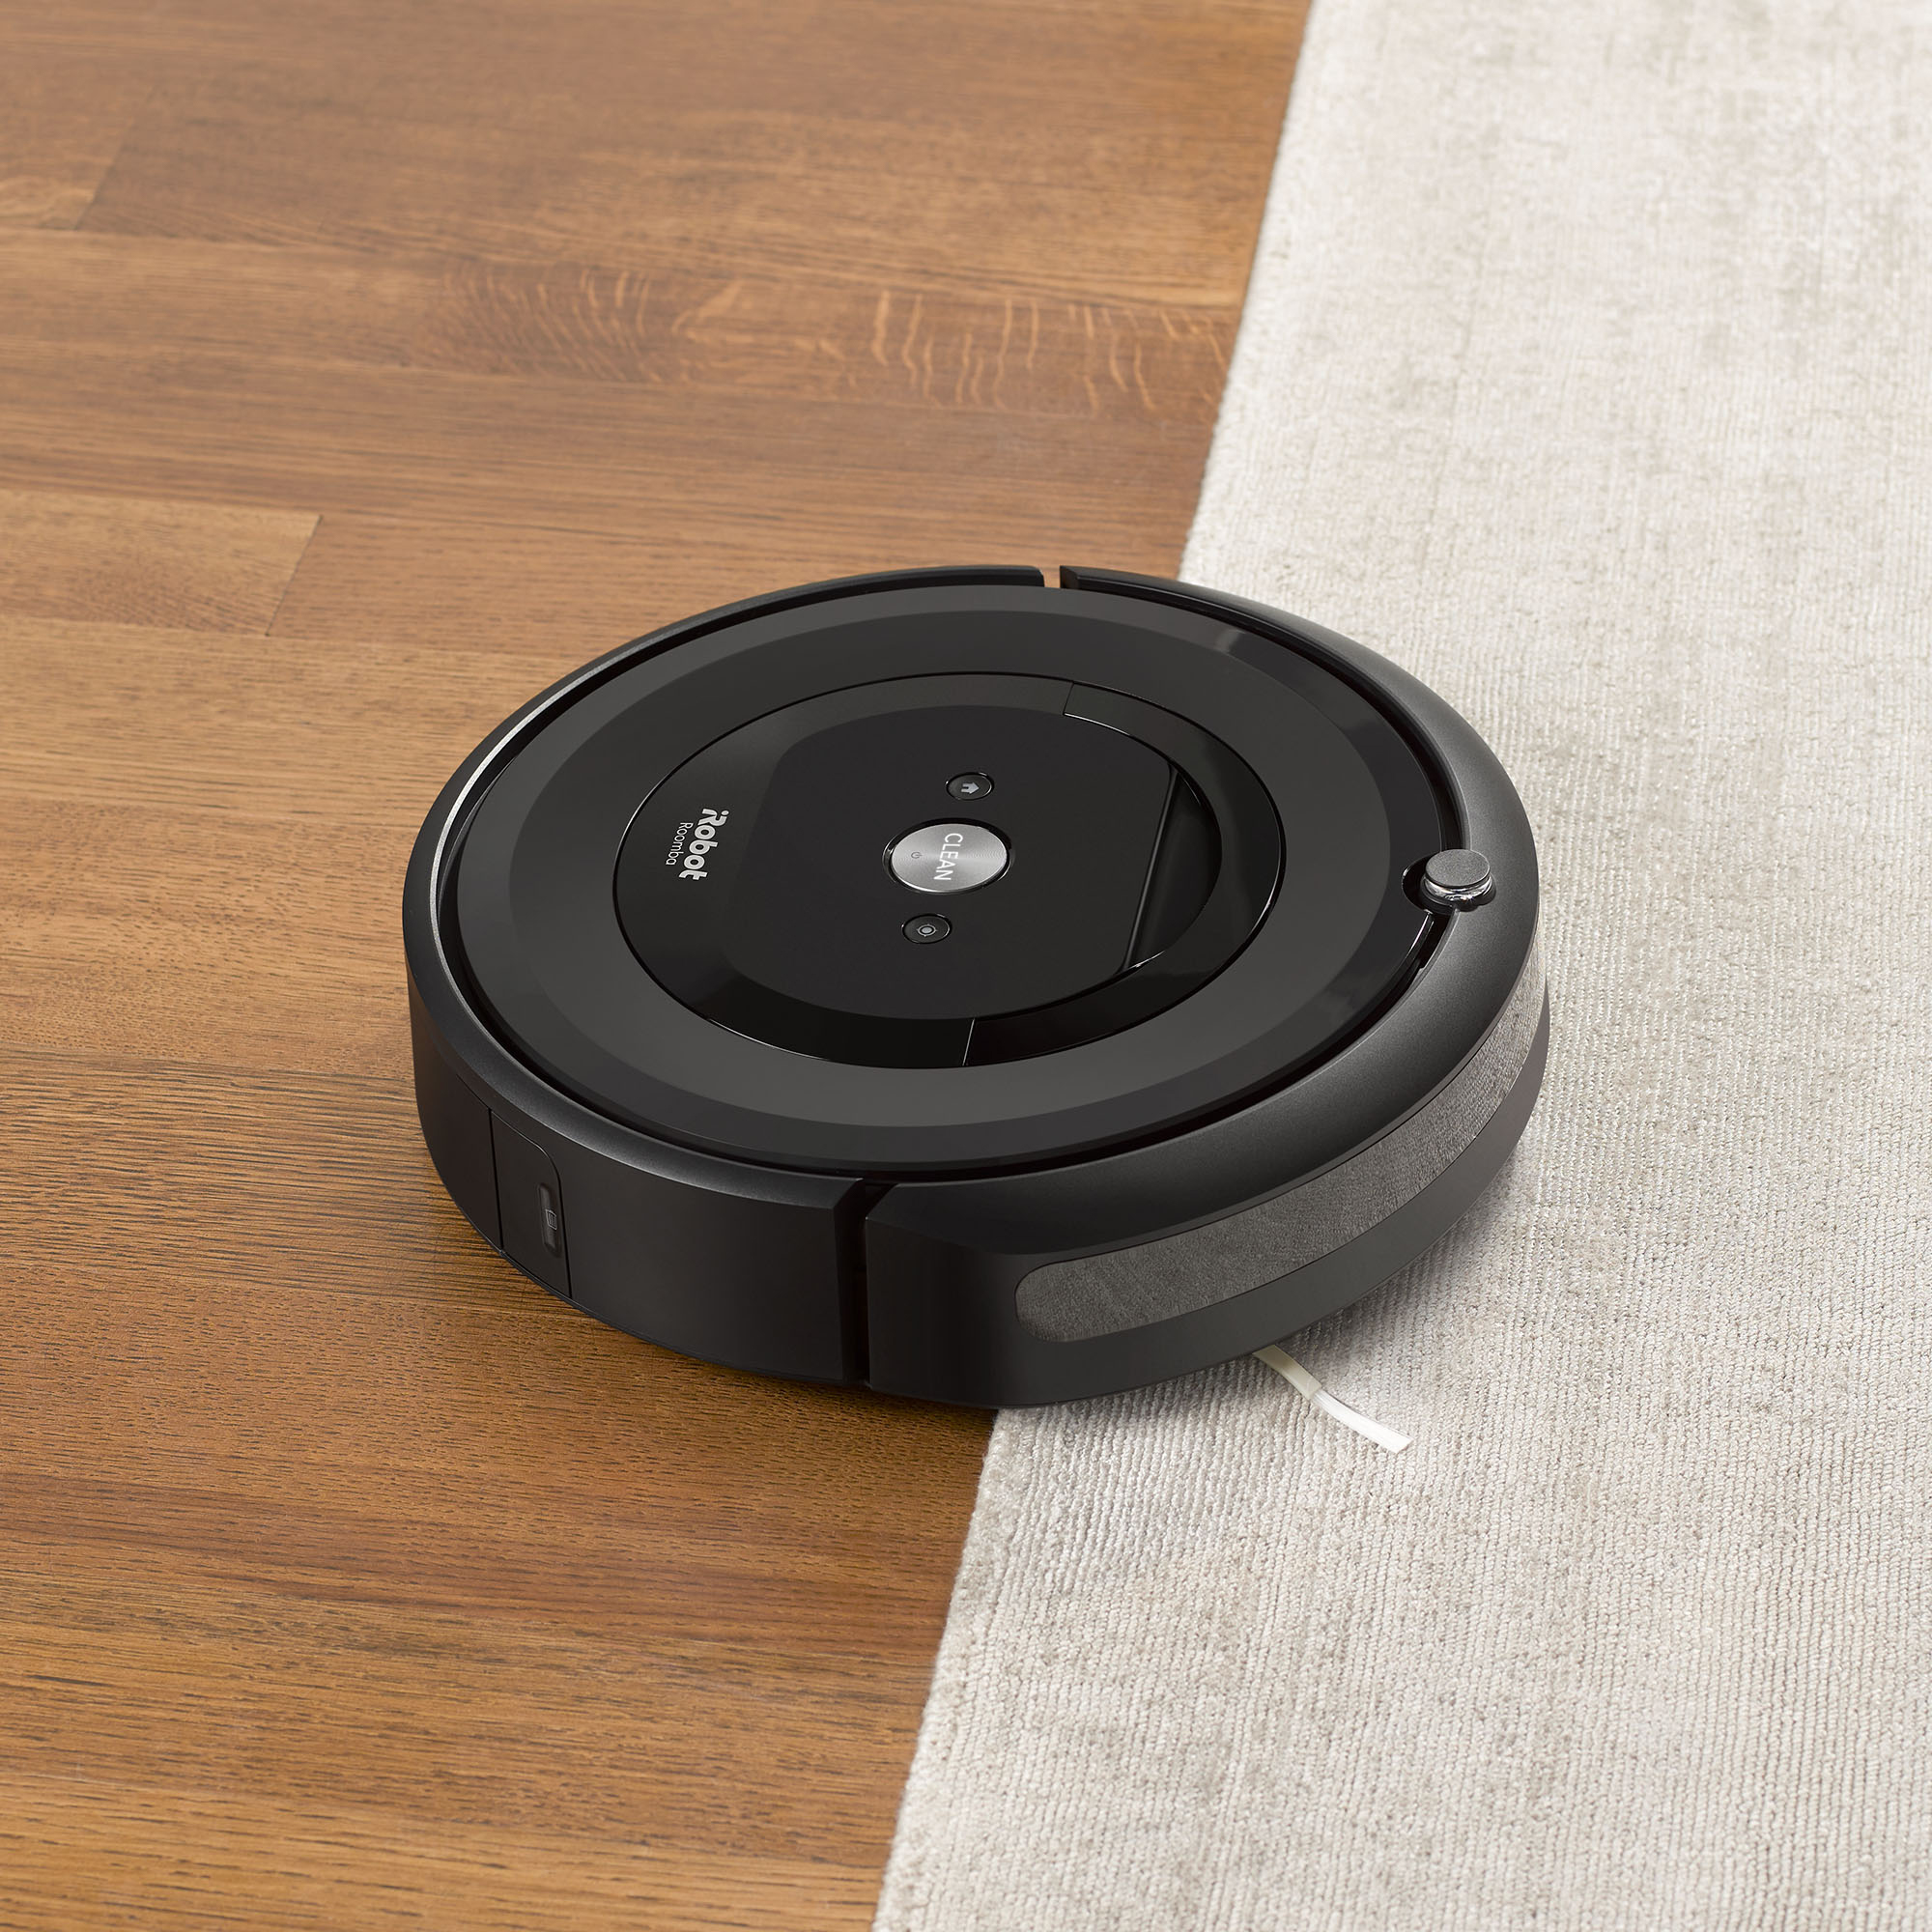 iRobot Roomba e6 (6134) Wi-Fi Connected Robot Vacuum - Wi-Fi Connected, Works with Google, Ideal for Pet Hair, Carpets, Hard, Self-Charging Robotic Vacuum - image 7 of 15